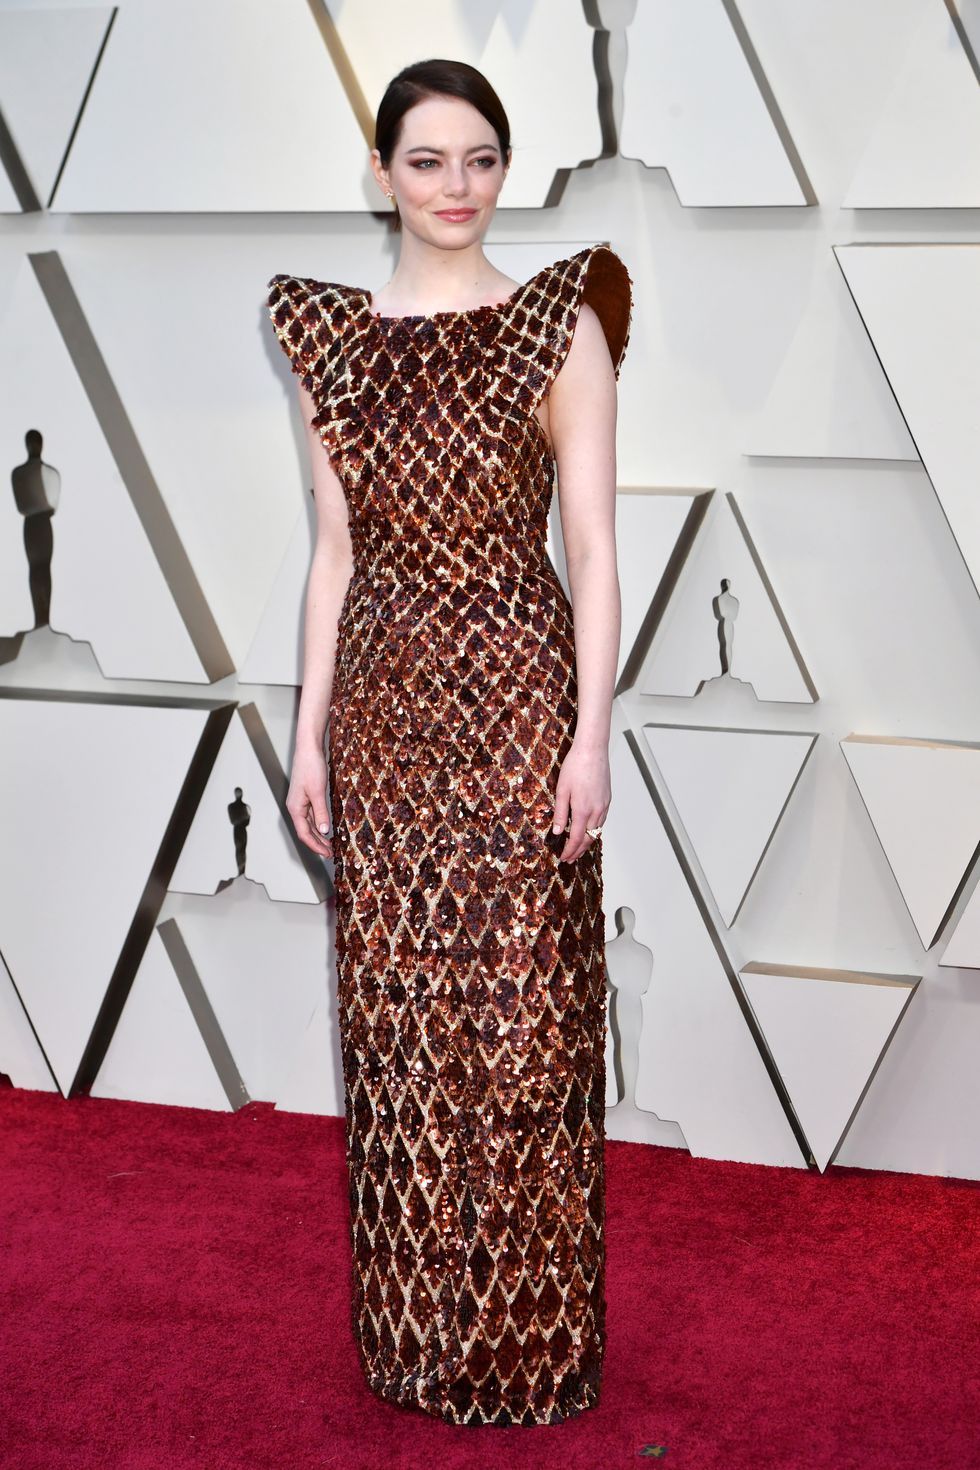 Emma Stone's Style File - Every One Of Her Best Red Carpet Looks